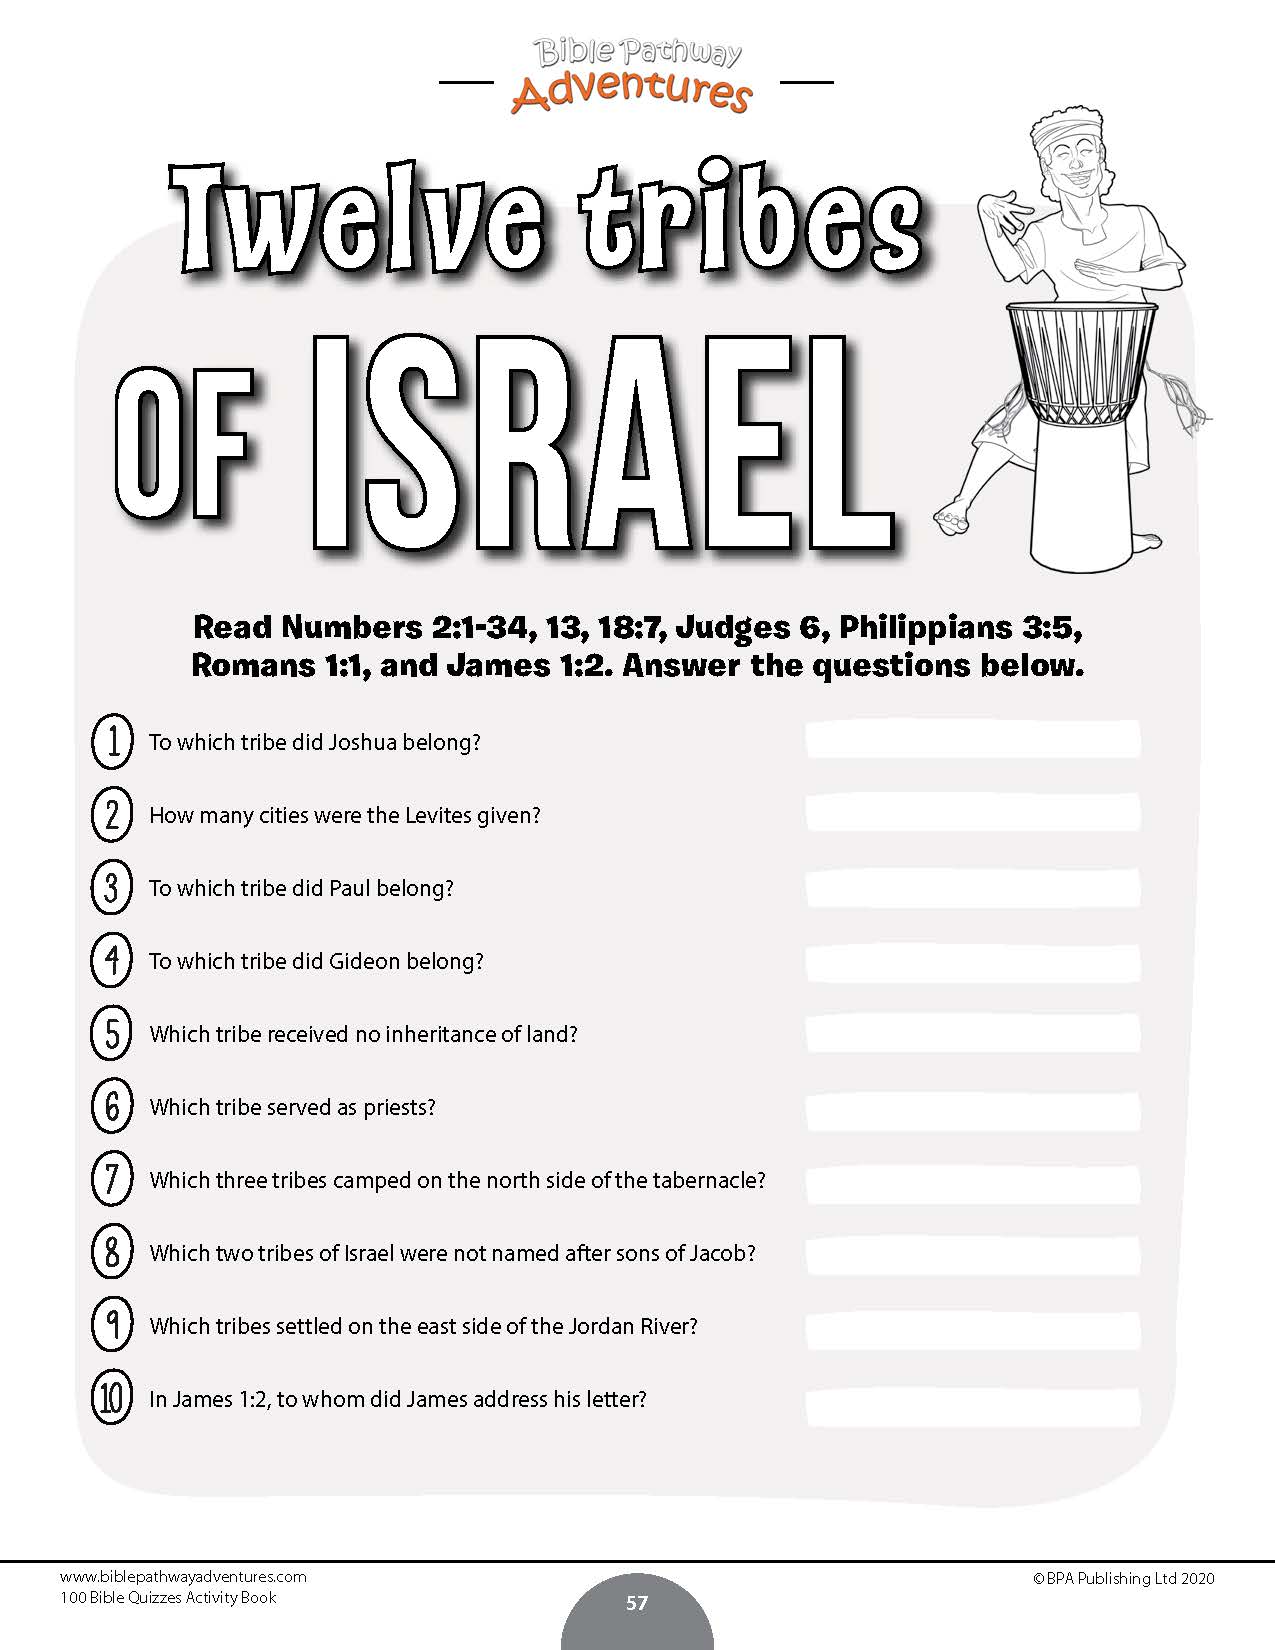 12 Tribes of Israel Bible quiz